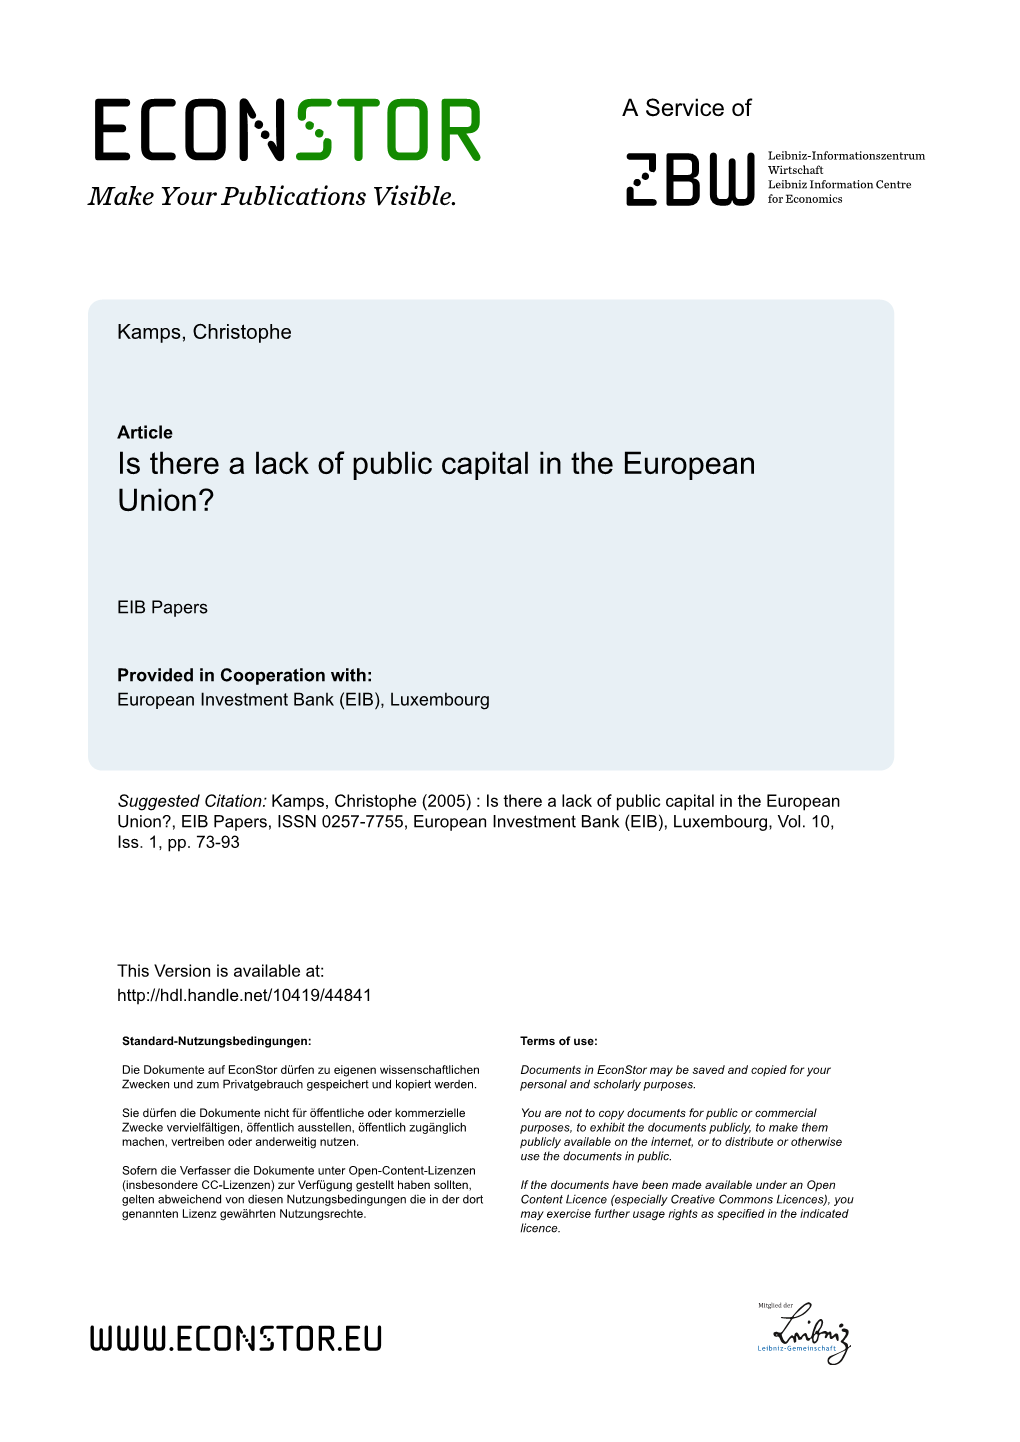 Is There a Lack of Public Capital in the European Union?